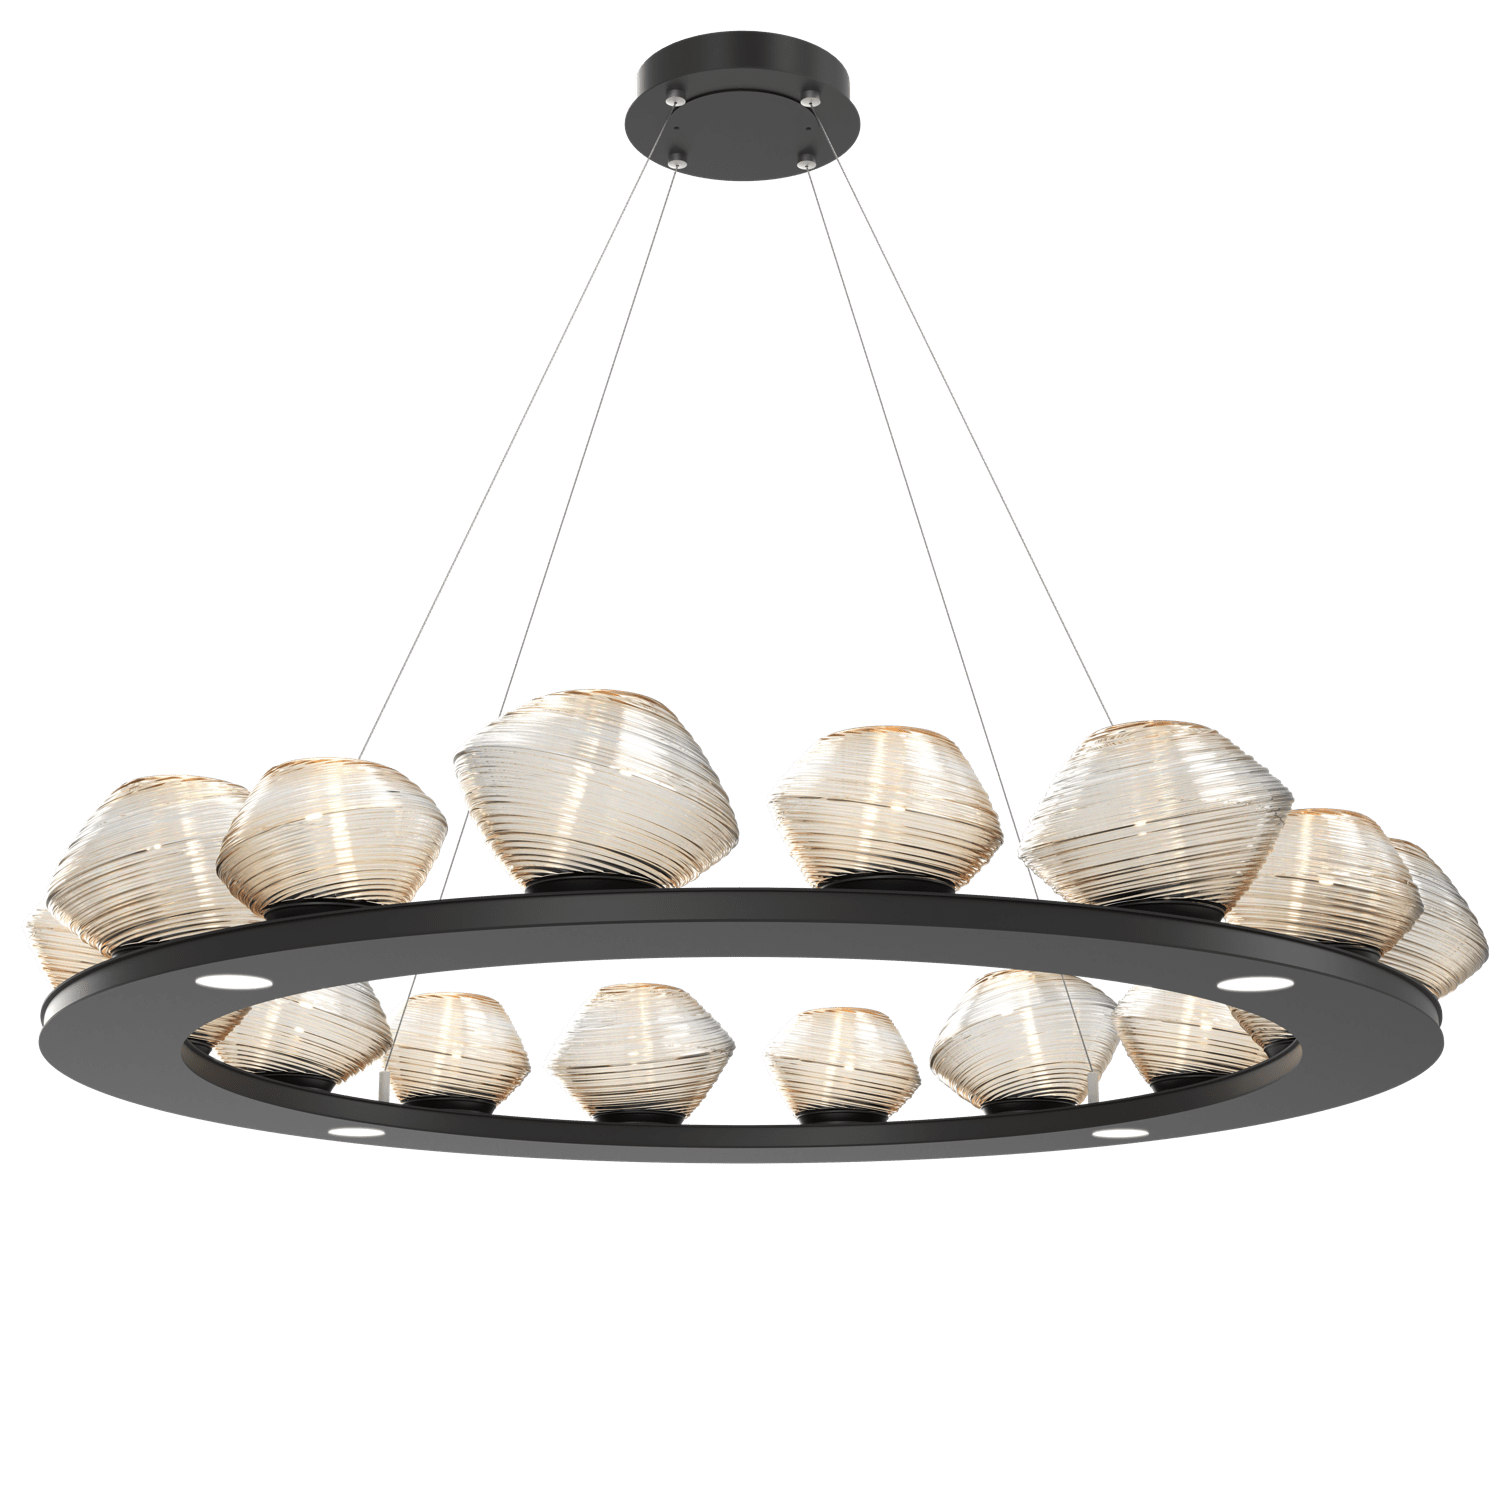 CHB0089-0D-MB-A-Hammerton-Studio-Mesa-48-inch-ring-chandelier-with-matte-black-finish-and-amber-blown-glass-shades-and-LED-lamping